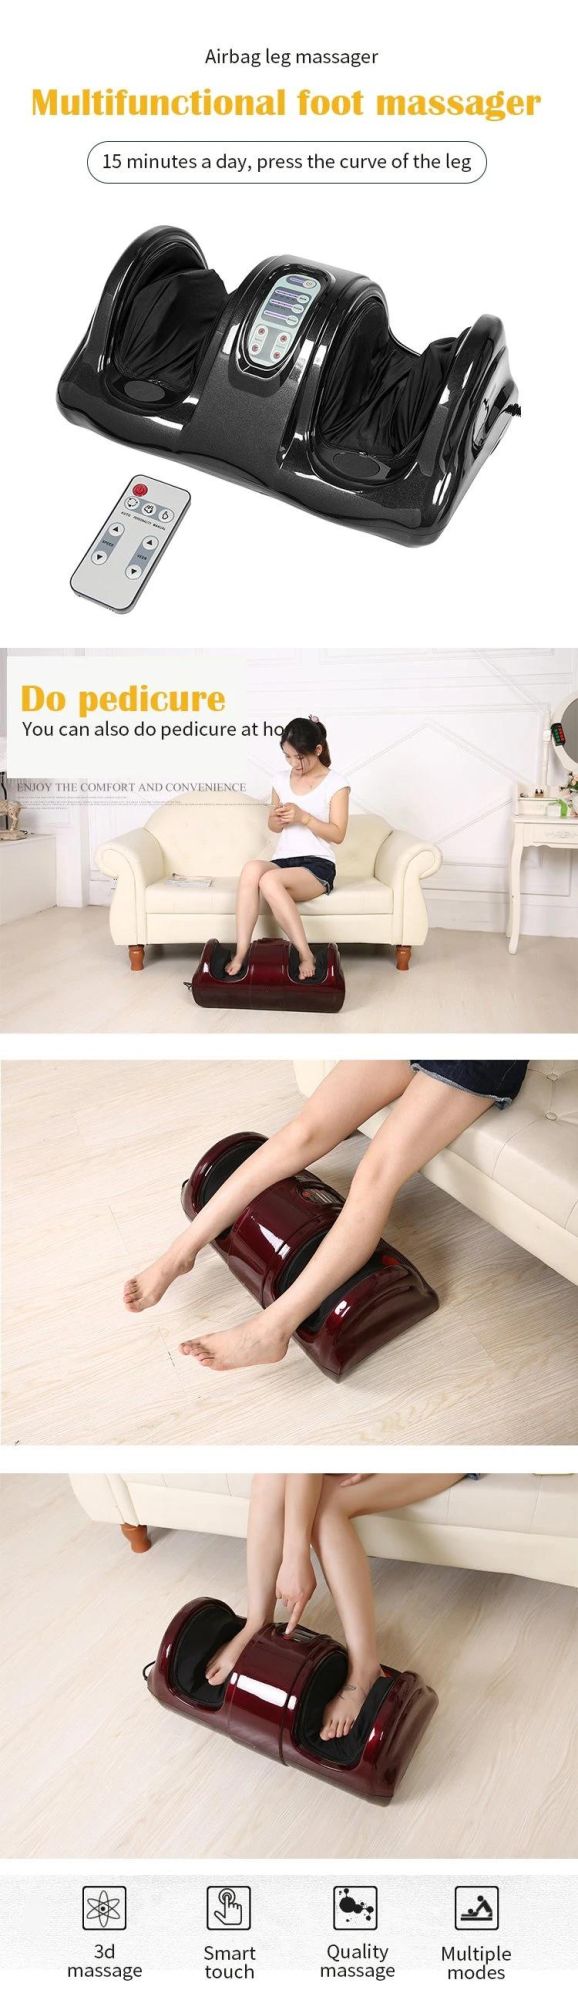 ABS RoHS Certificate Hot-Selling High Quality Low Price Roller Vibrating Foot Massager